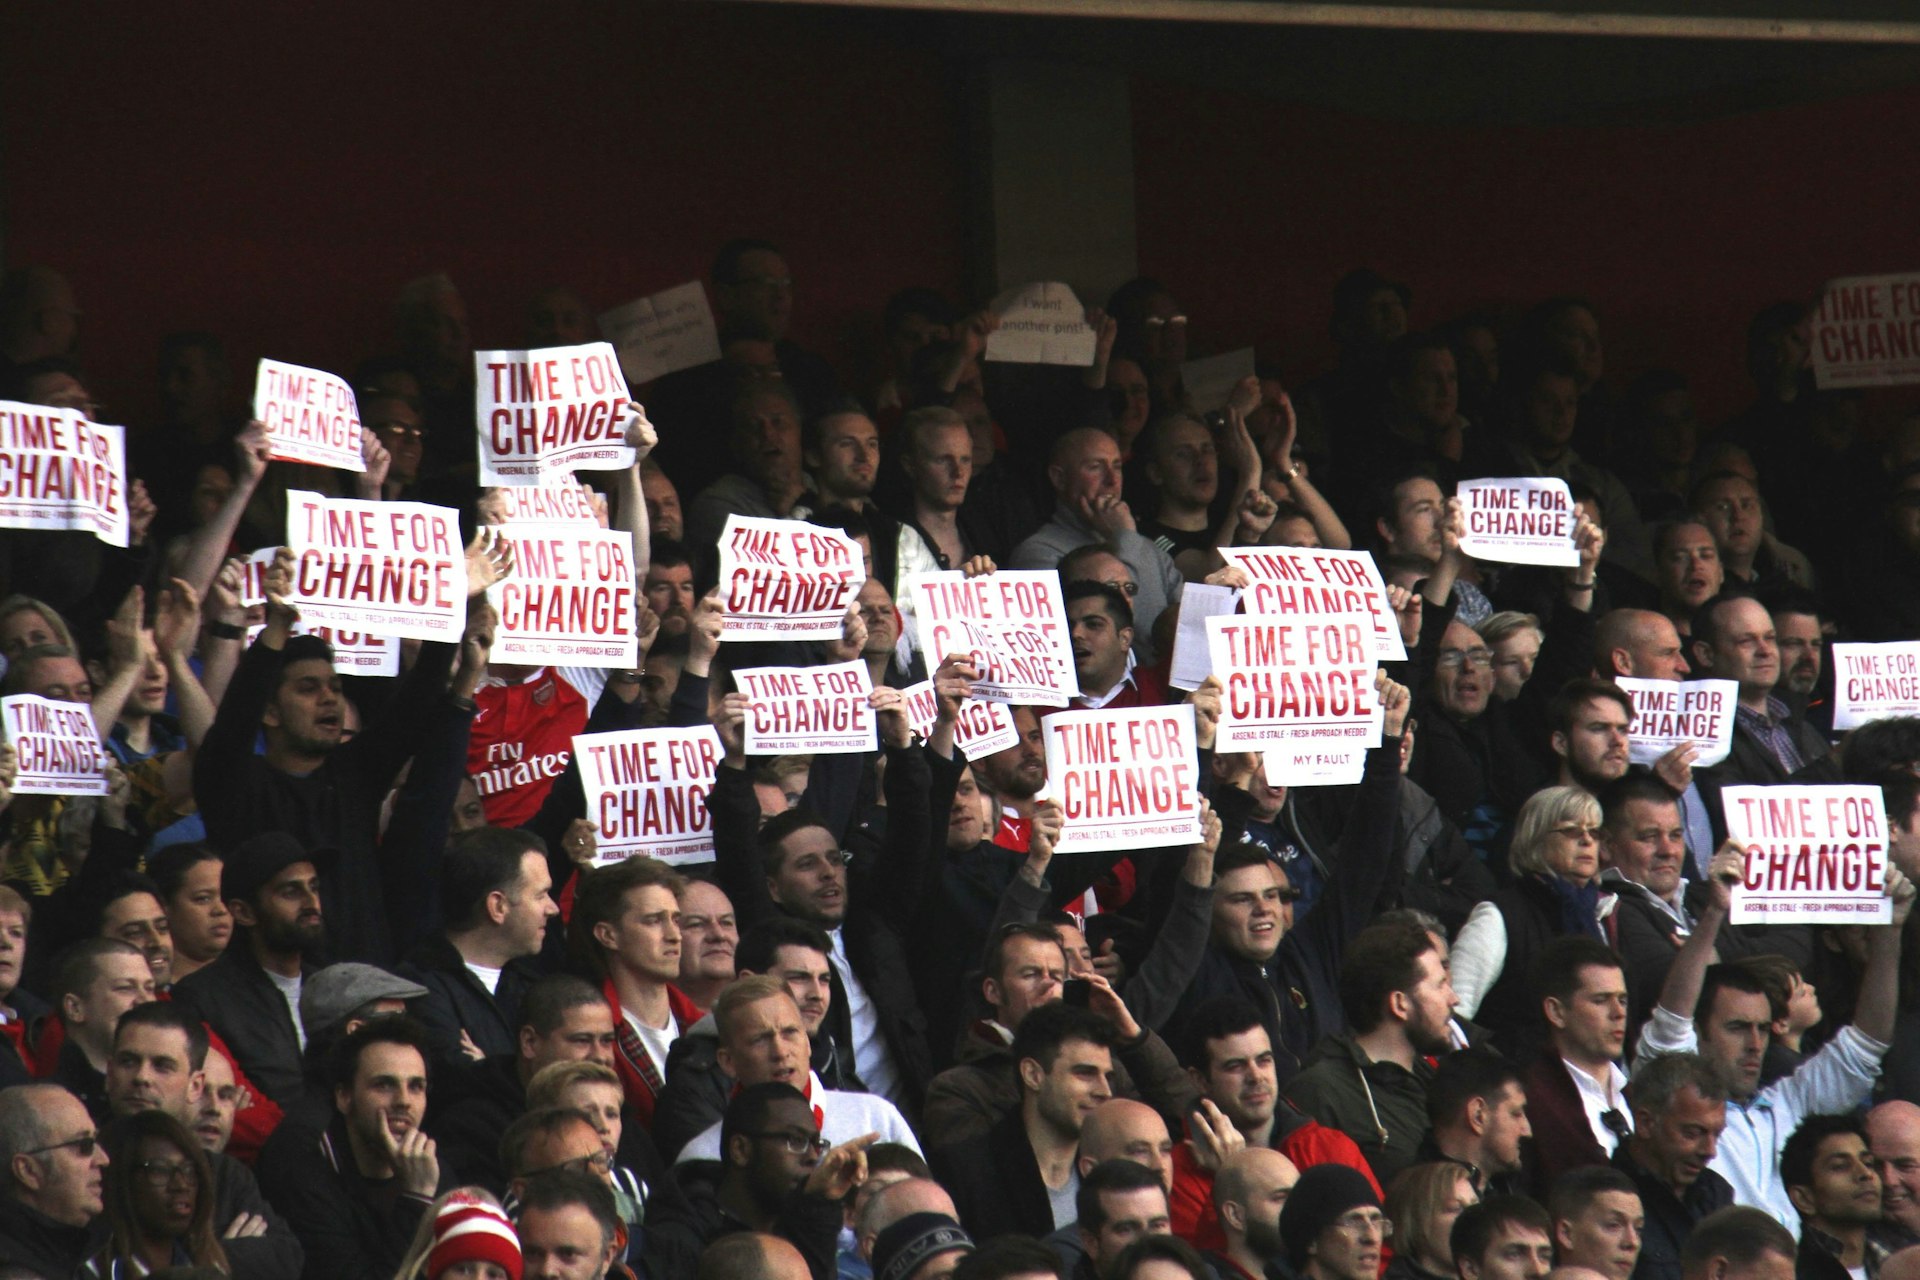 The Premier League protests are a working class revolt